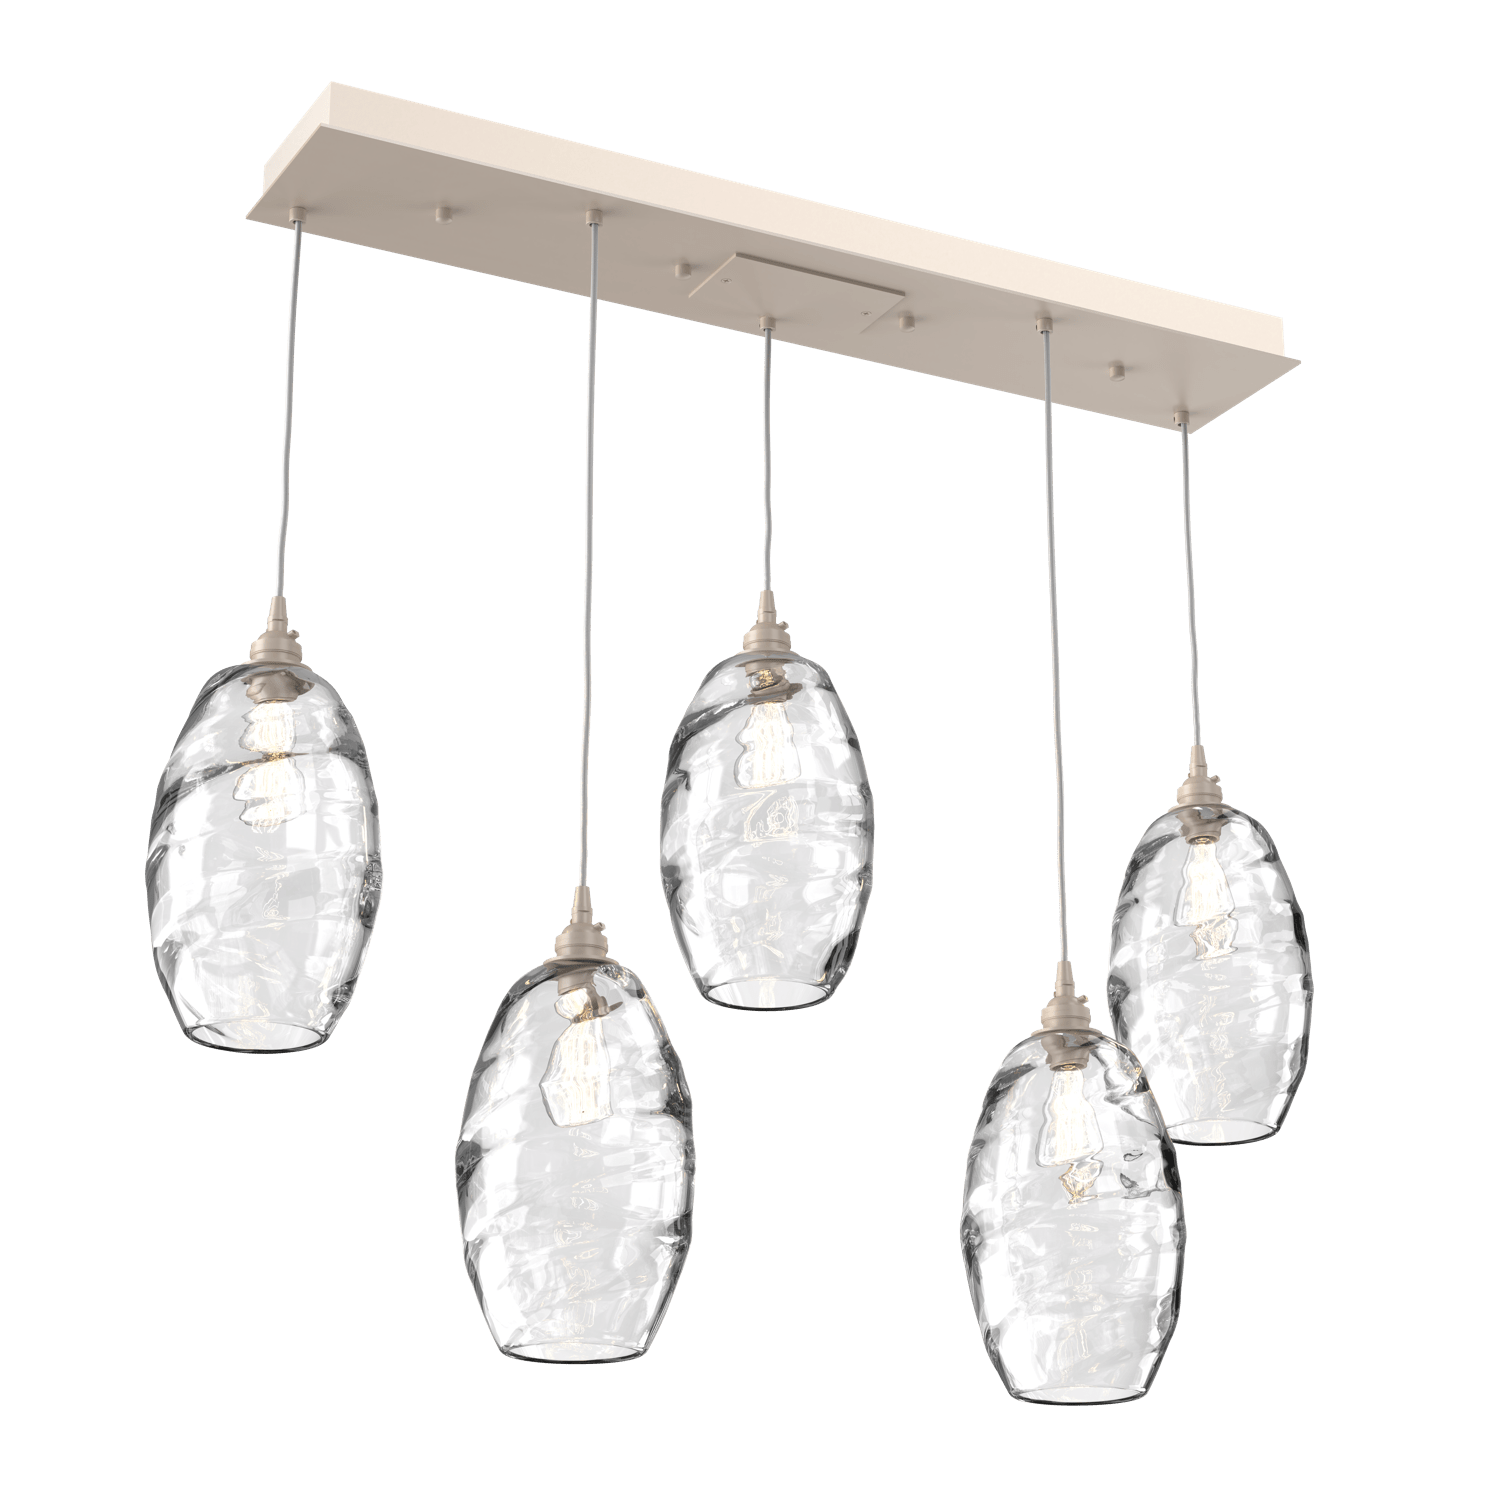 PLB0035-05-BS-OC-Hammerton-Studio-Optic-Blown-Glass-Elisse-5-light-linear-pendant-chandelier-with-metallic-beige-silver-finish-and-optic-clear-blown-glass-shades-and-incandescent-lamping